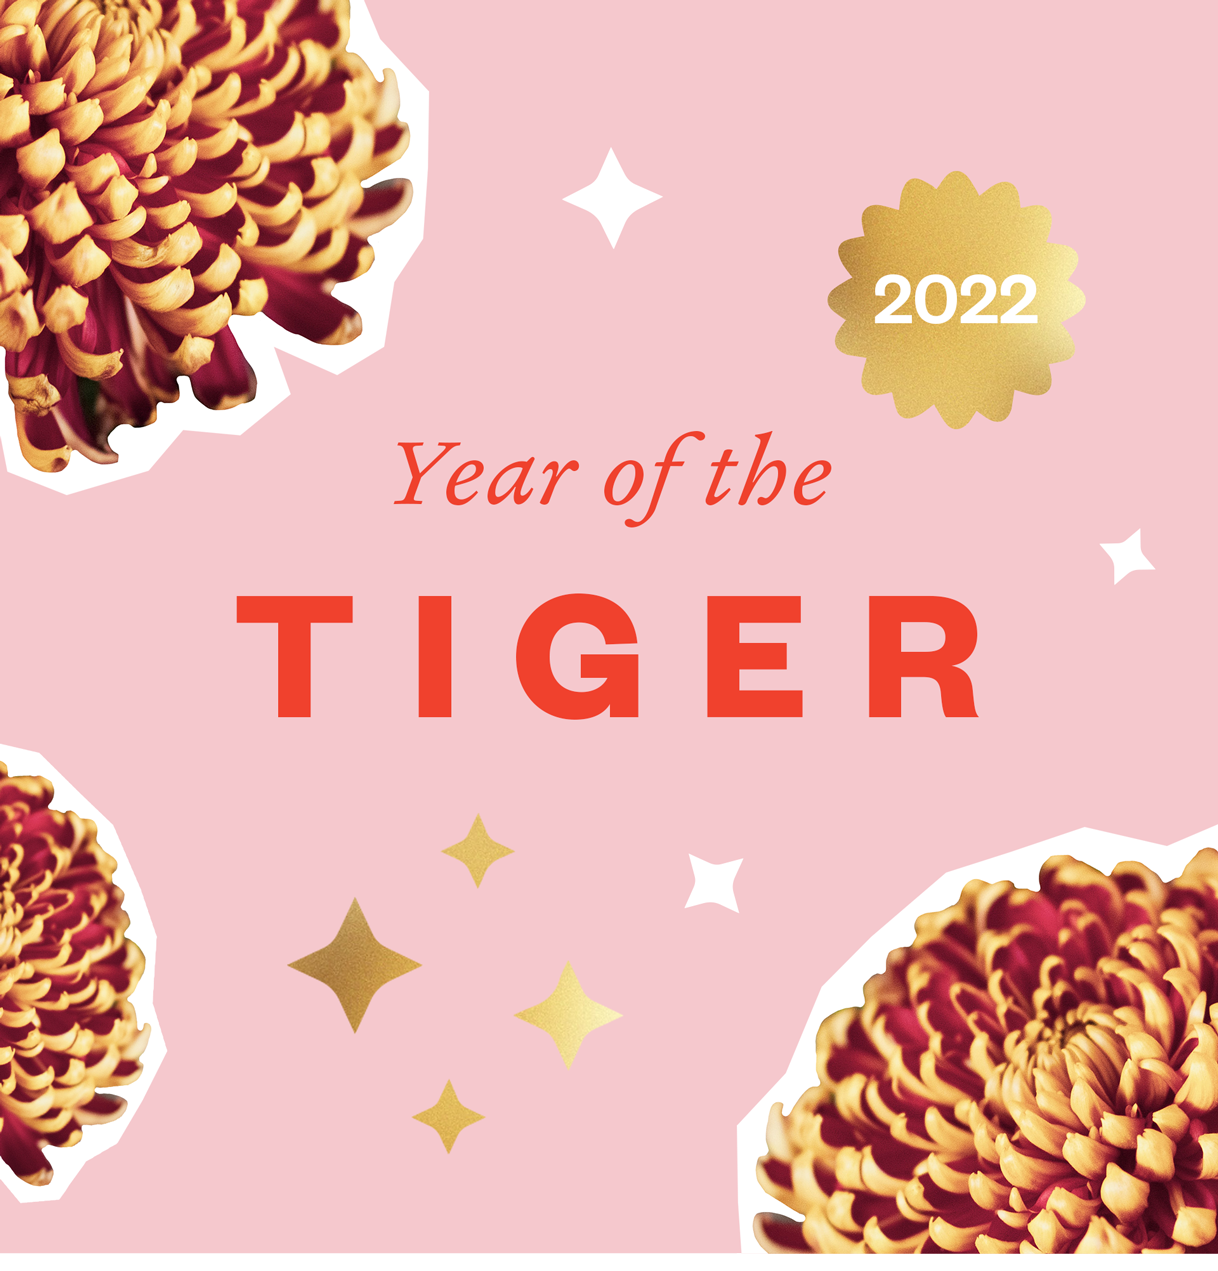 The Year of the Tiger - 2022!